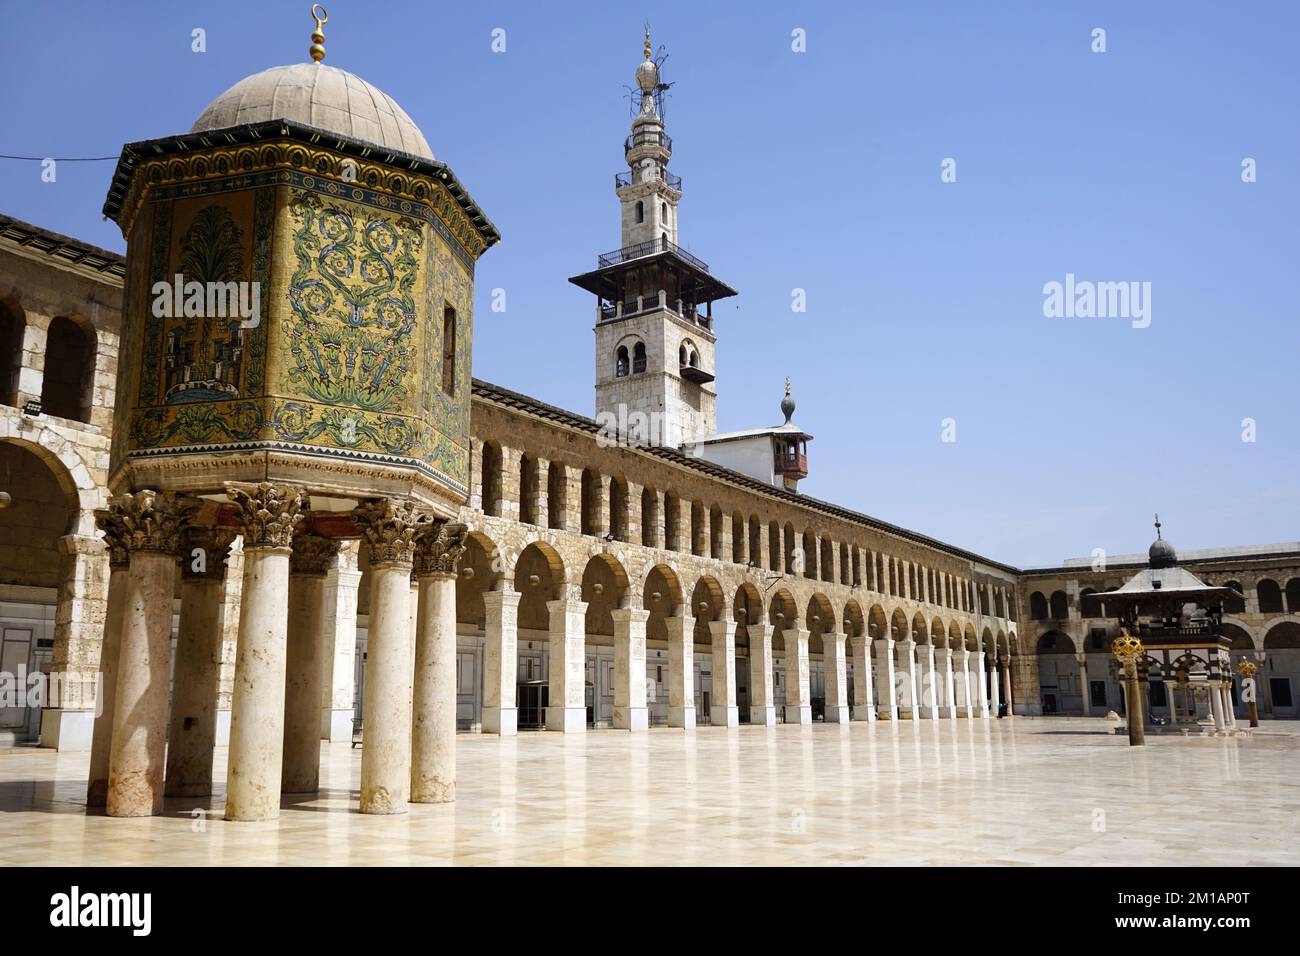 Damascus, Syria 02 September 2022 The Umayyad Mosque, one of the oldest and largest mosques in the world. Stock Photo